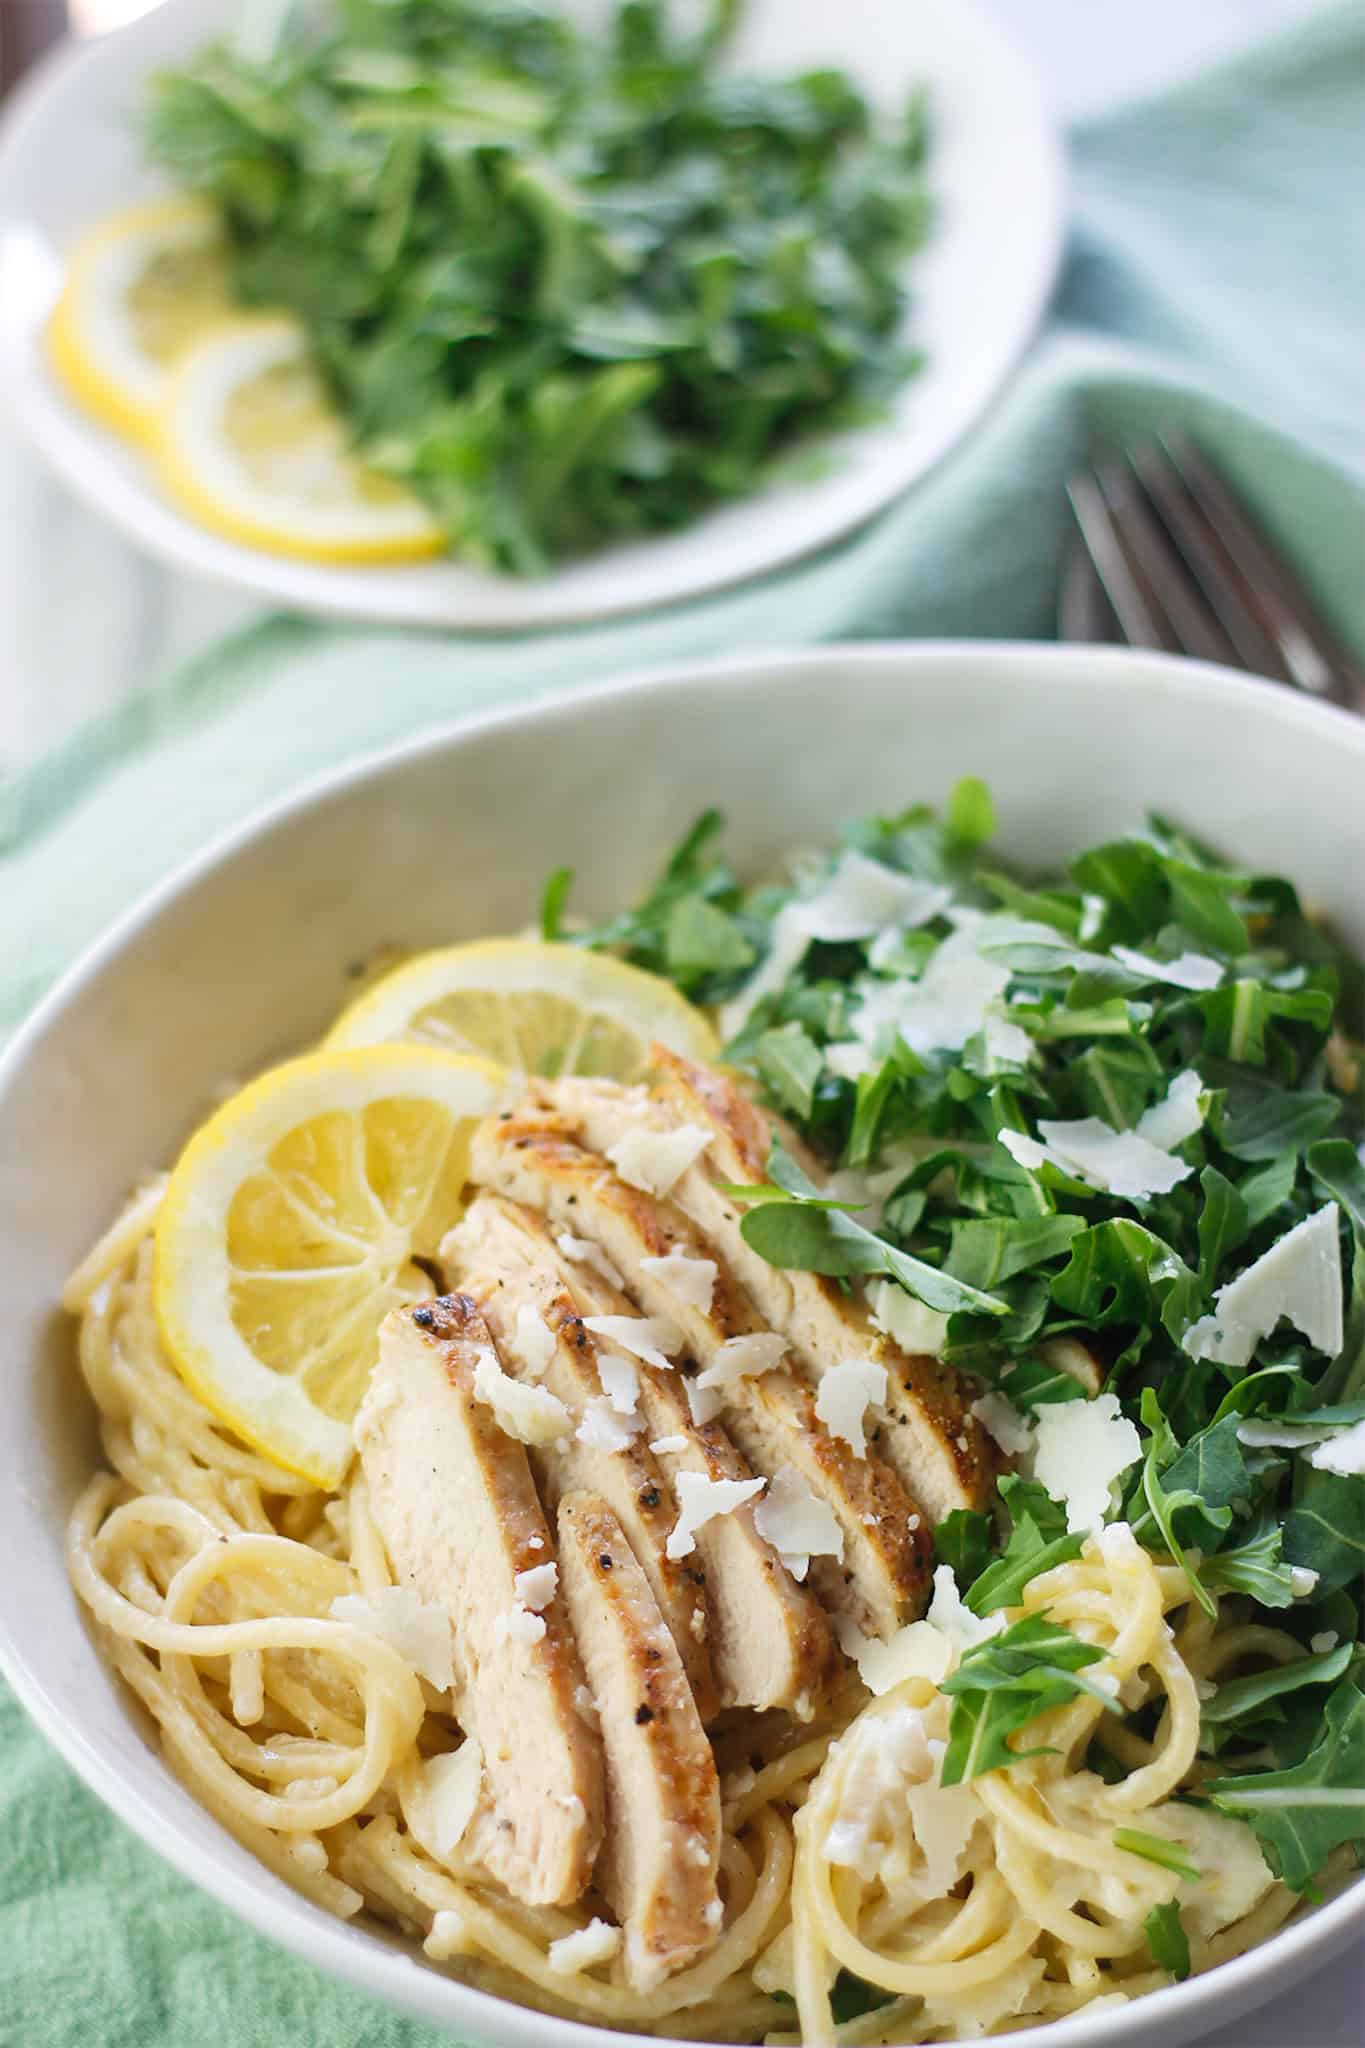 White bowl filled with pasta al limone topped with sliced grilled chicken and chopped arugula. There is a plate with sliced lemons and arugula in the background.